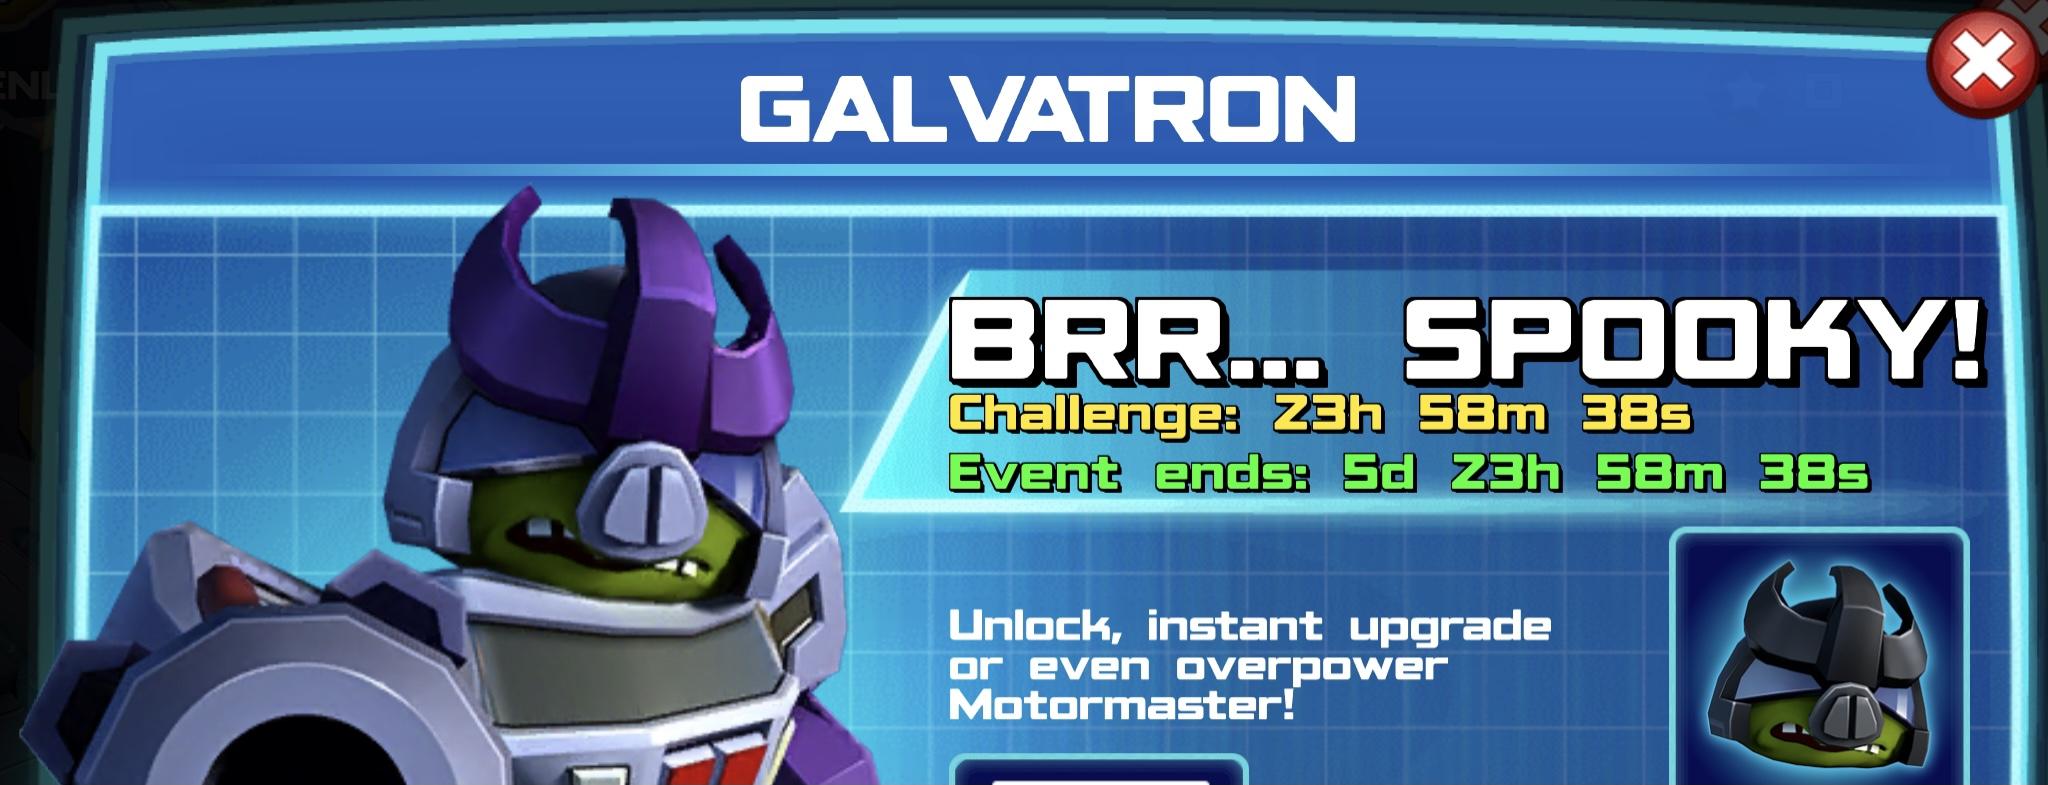 The event banner for Galvatron – Brr … Spooky!